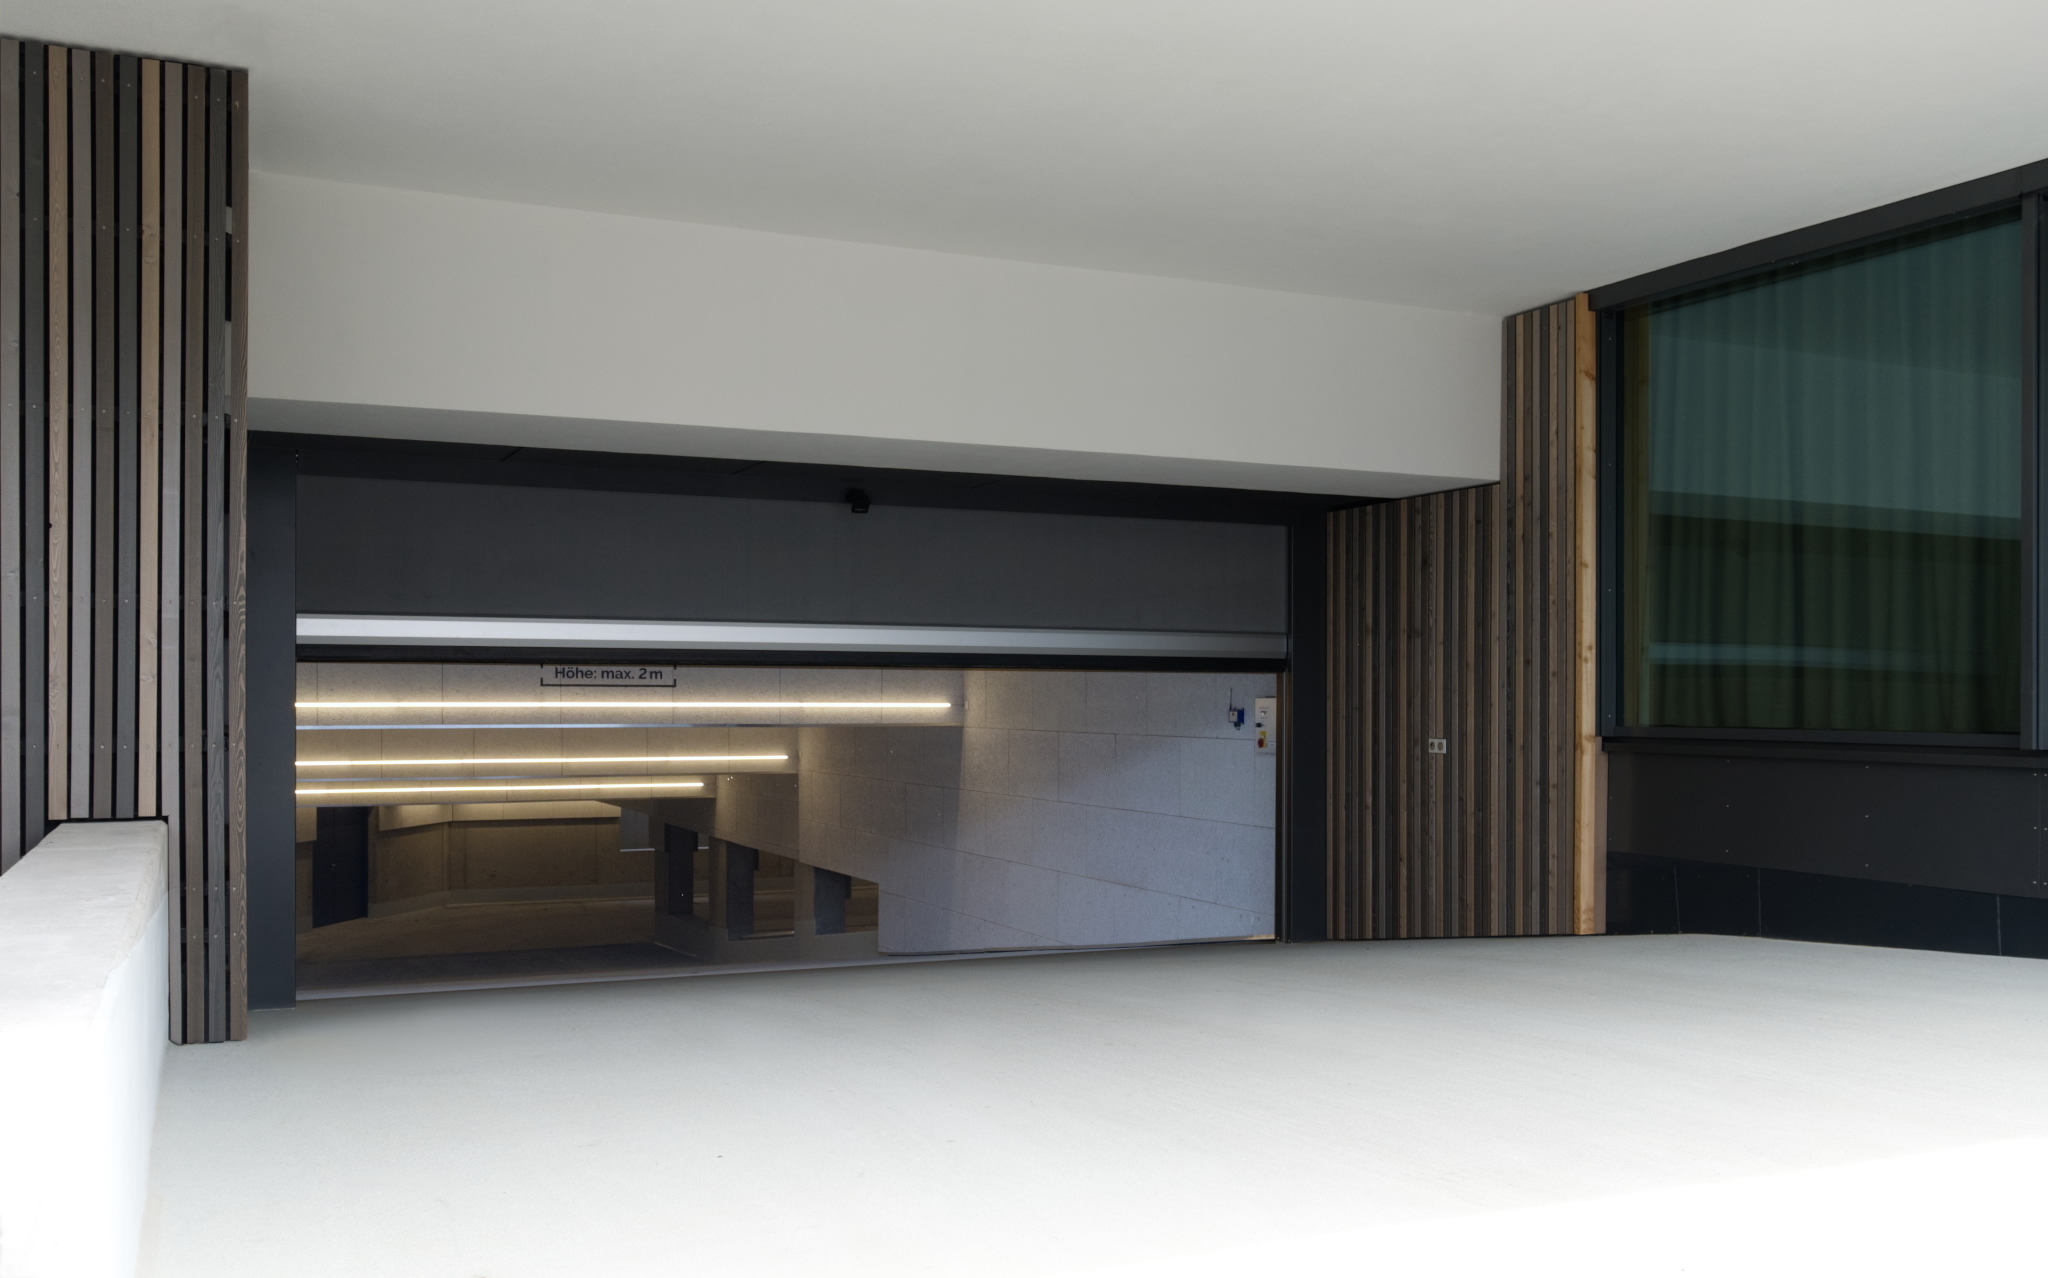 EFAFLEX doors provided an elegant, quiet and safe solution for the Spinnereipark garage